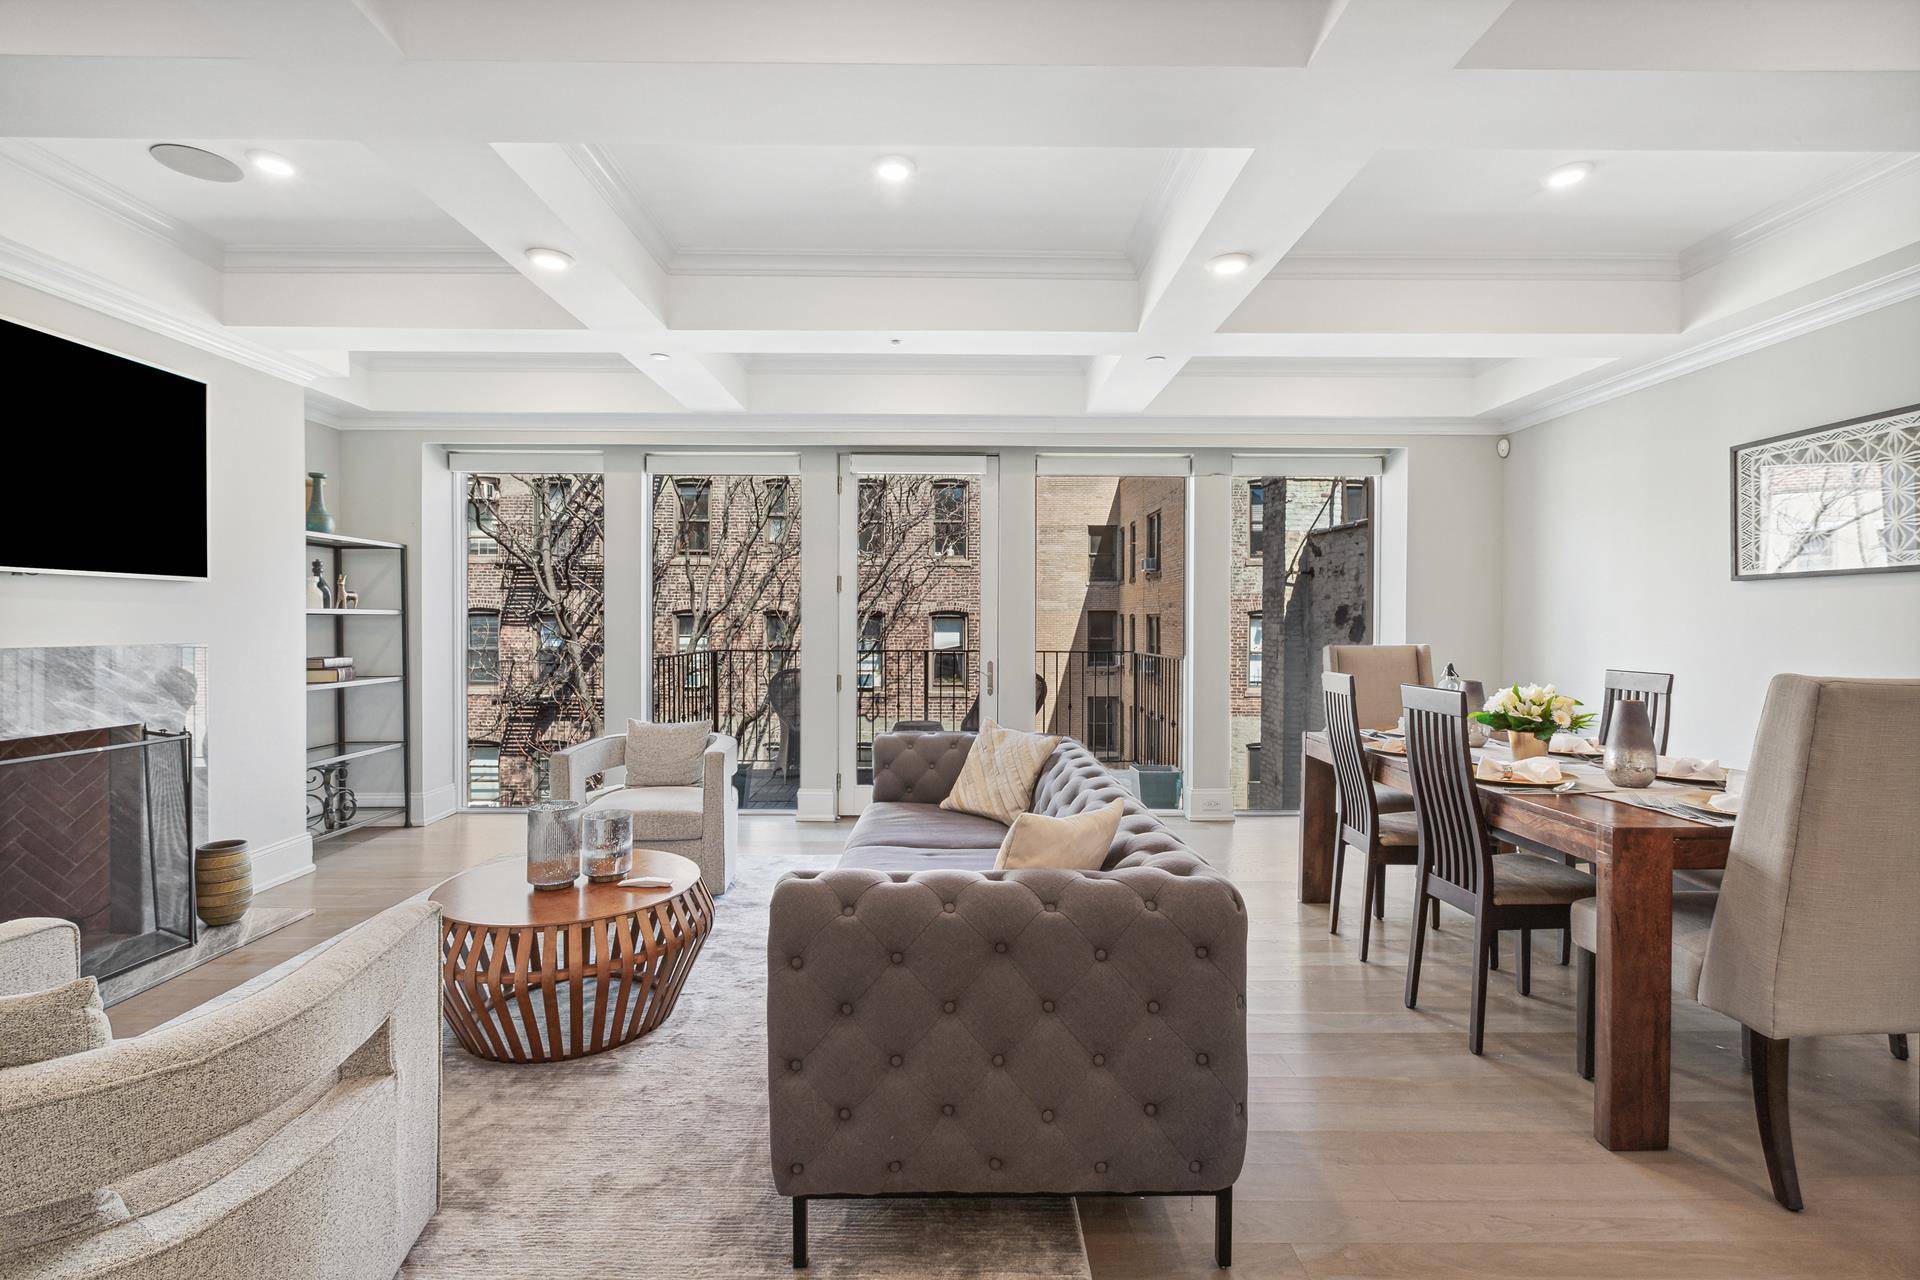 Introducing The Penthouse at 225 East 81st Street, an exquisite three bedroom apartment that boasts the most expansive private roof terrace on the Upper East Side.